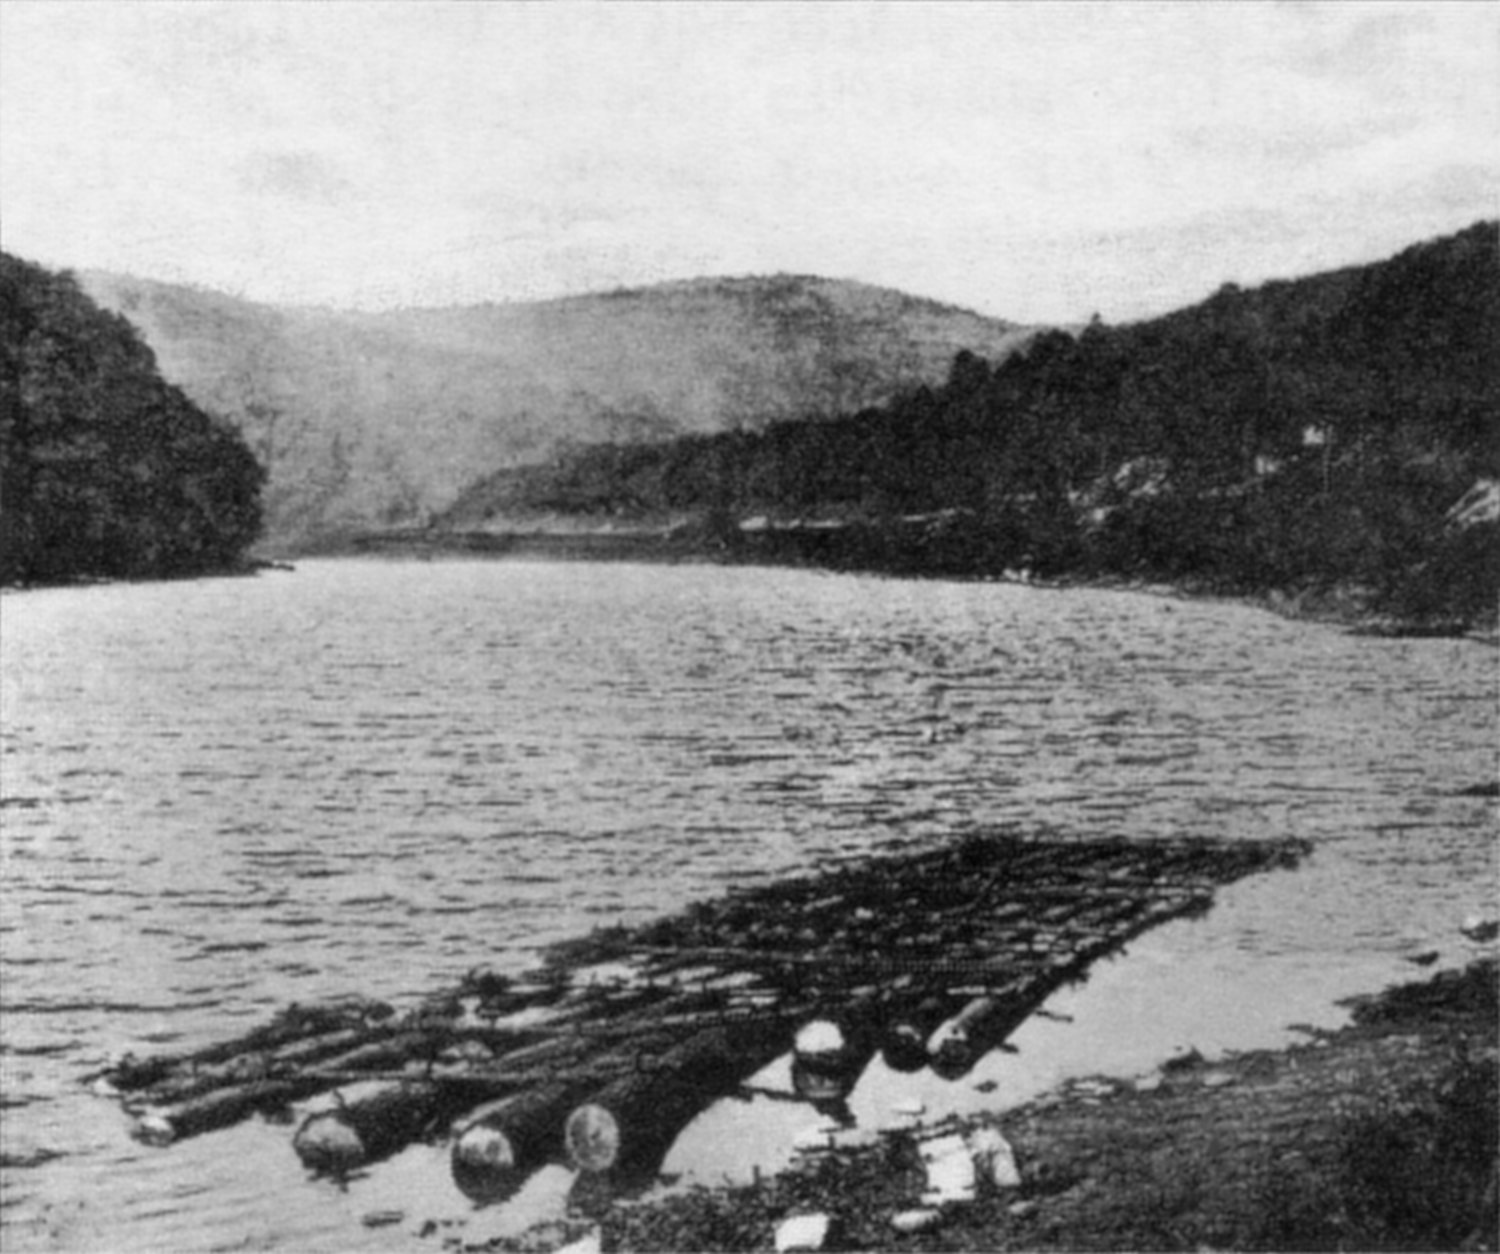 The last log raft pushes off from Long Eddy, early in the 20th century.